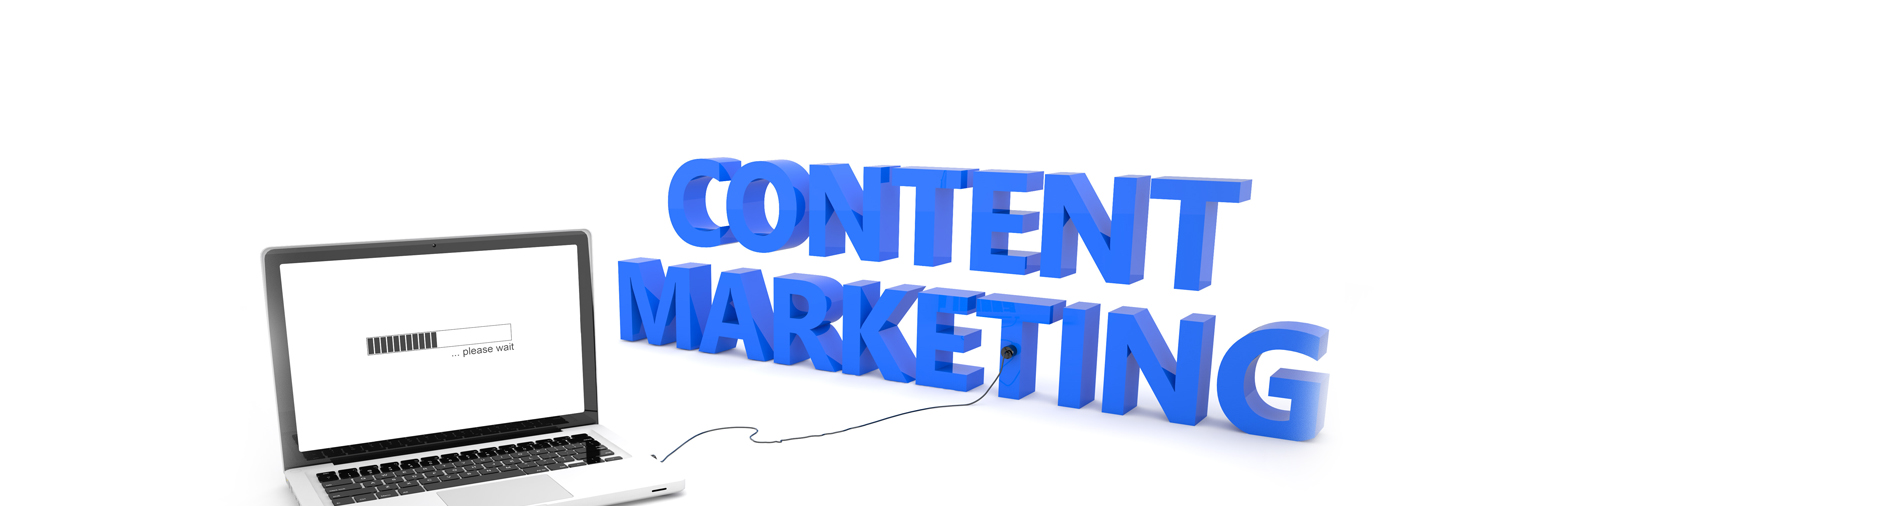 Top Content Marketing Ideas for Hospitals and Doctors Offices